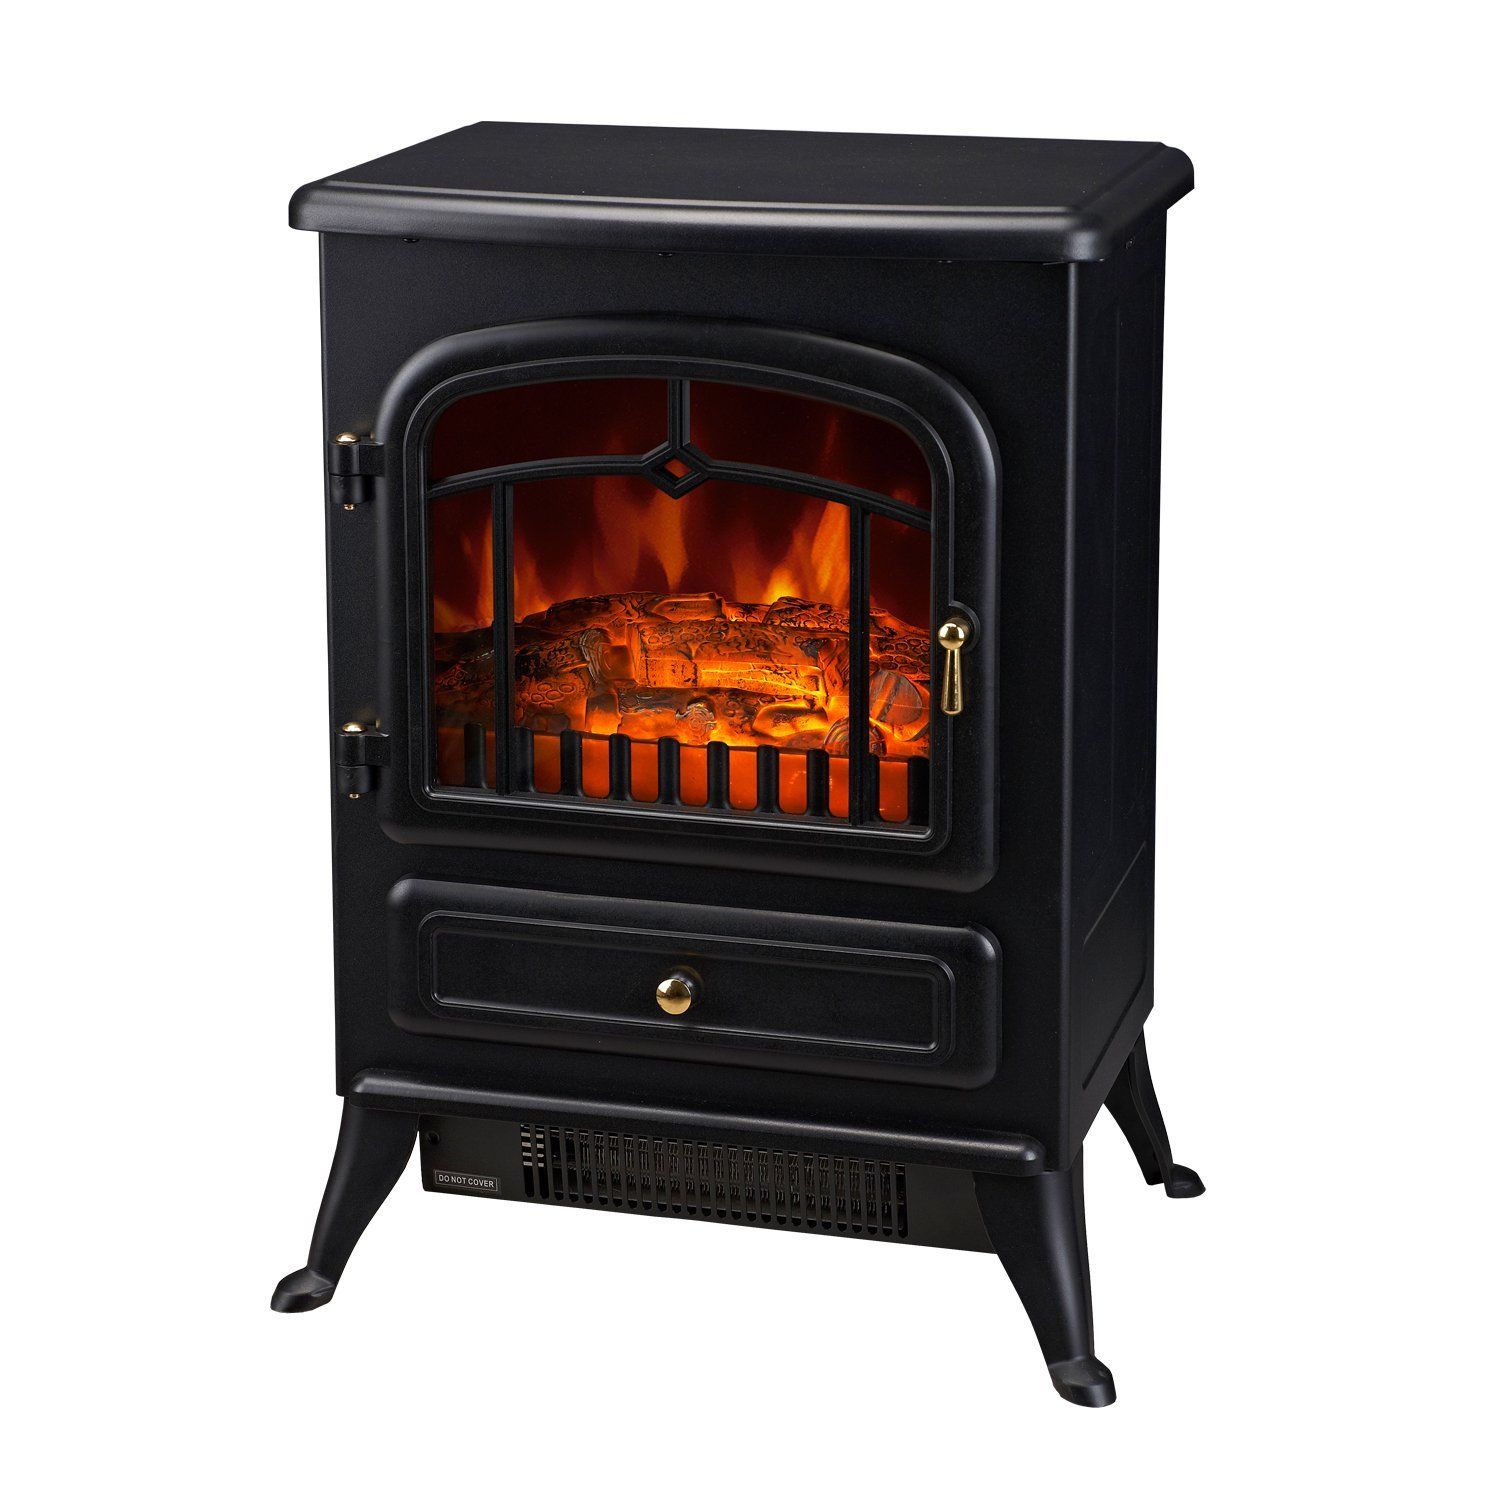 HOMCOM Freestanding Electric Fireplace Heater with Realistic Flames, 21" H, 1500W, Black | Walmart (US)